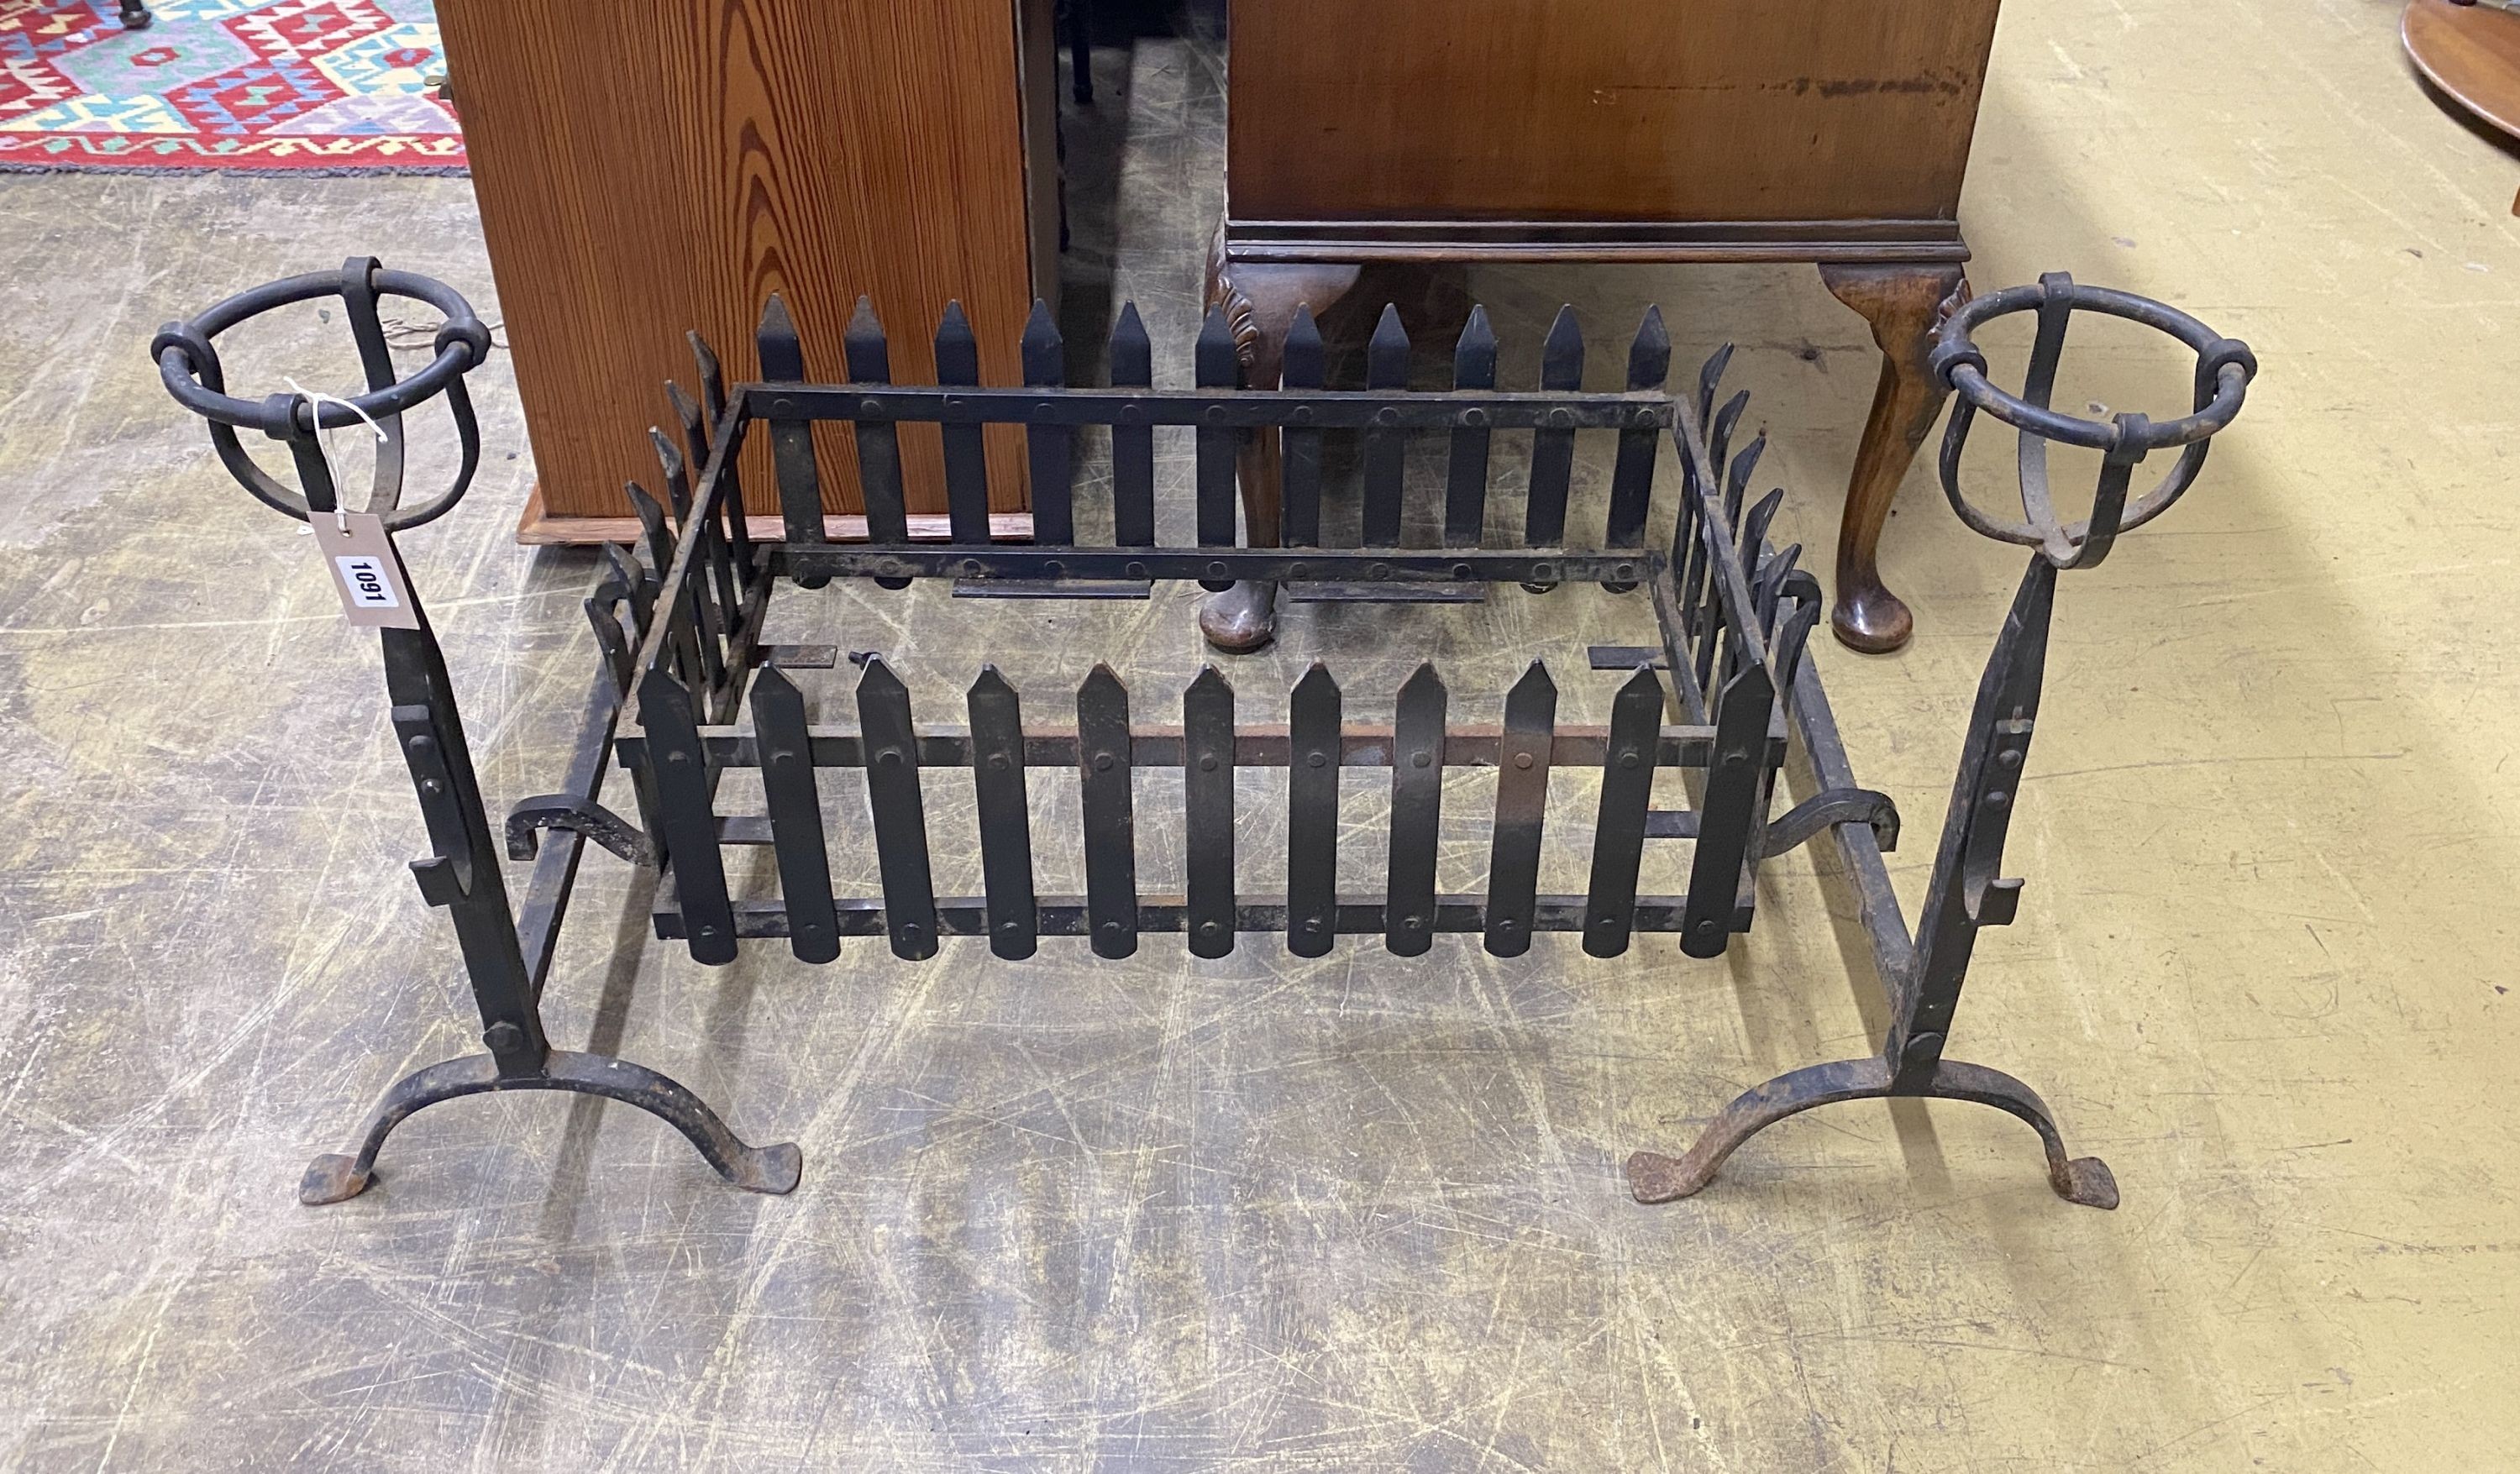 A wrought iron fire basket, width 71cm, depth 41cm, height 36cm and a pair of fire dogs